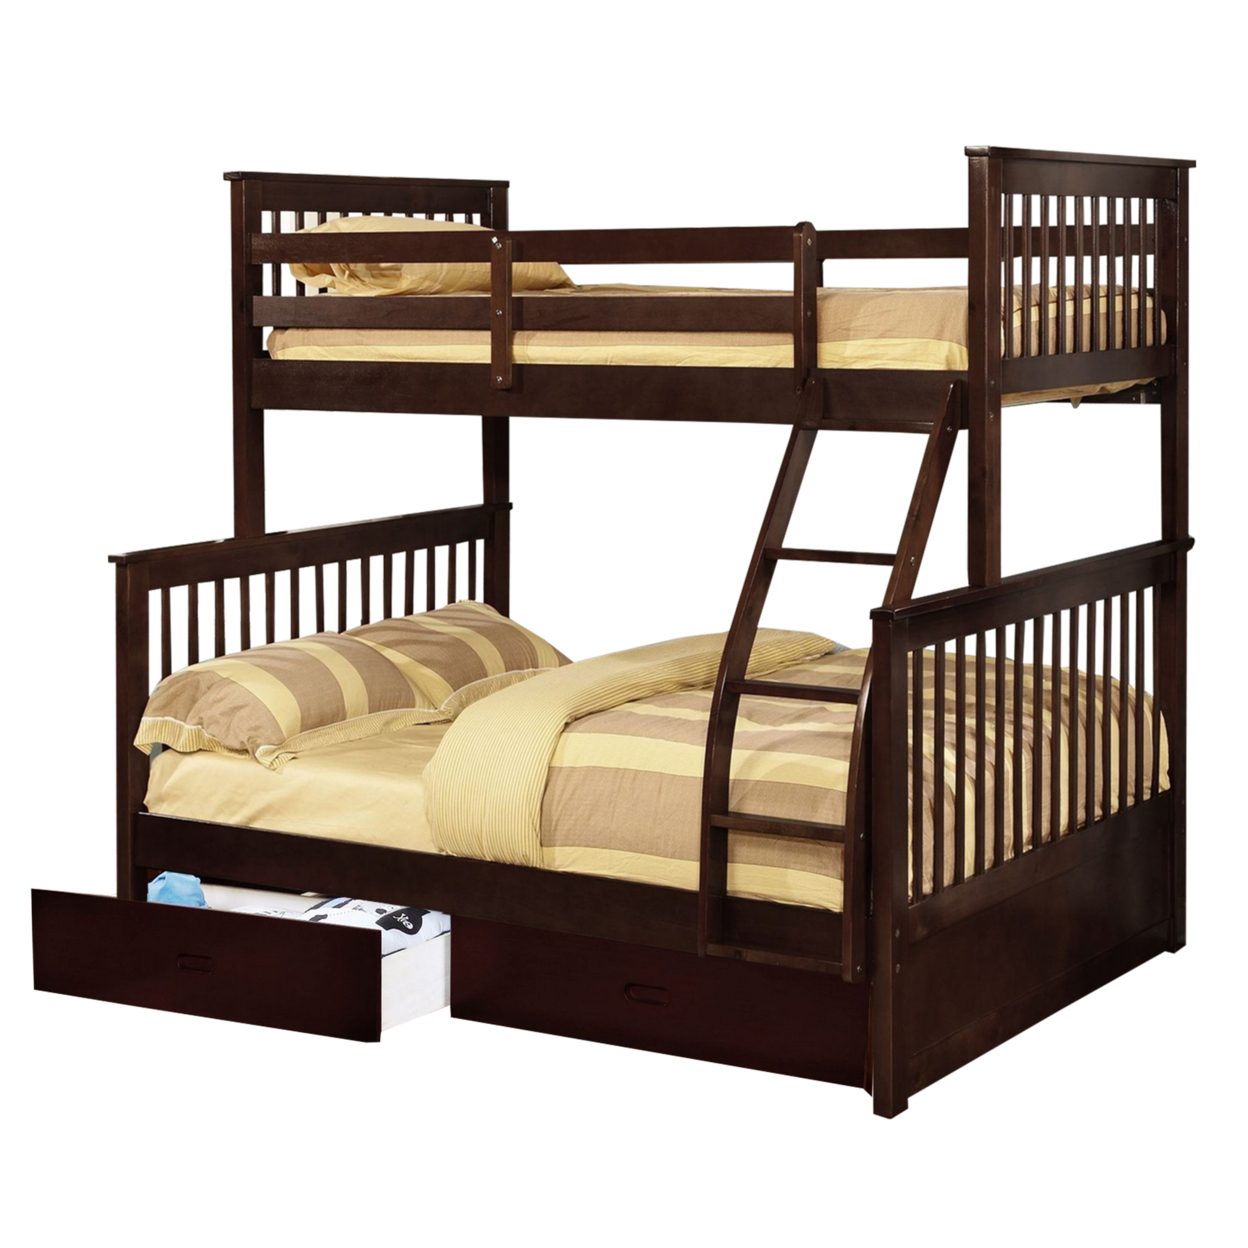 Mission Style Wooden Twin Over Full Bunk Bed With 2 Drawers, Dark Brown- Saltoro Sherpi